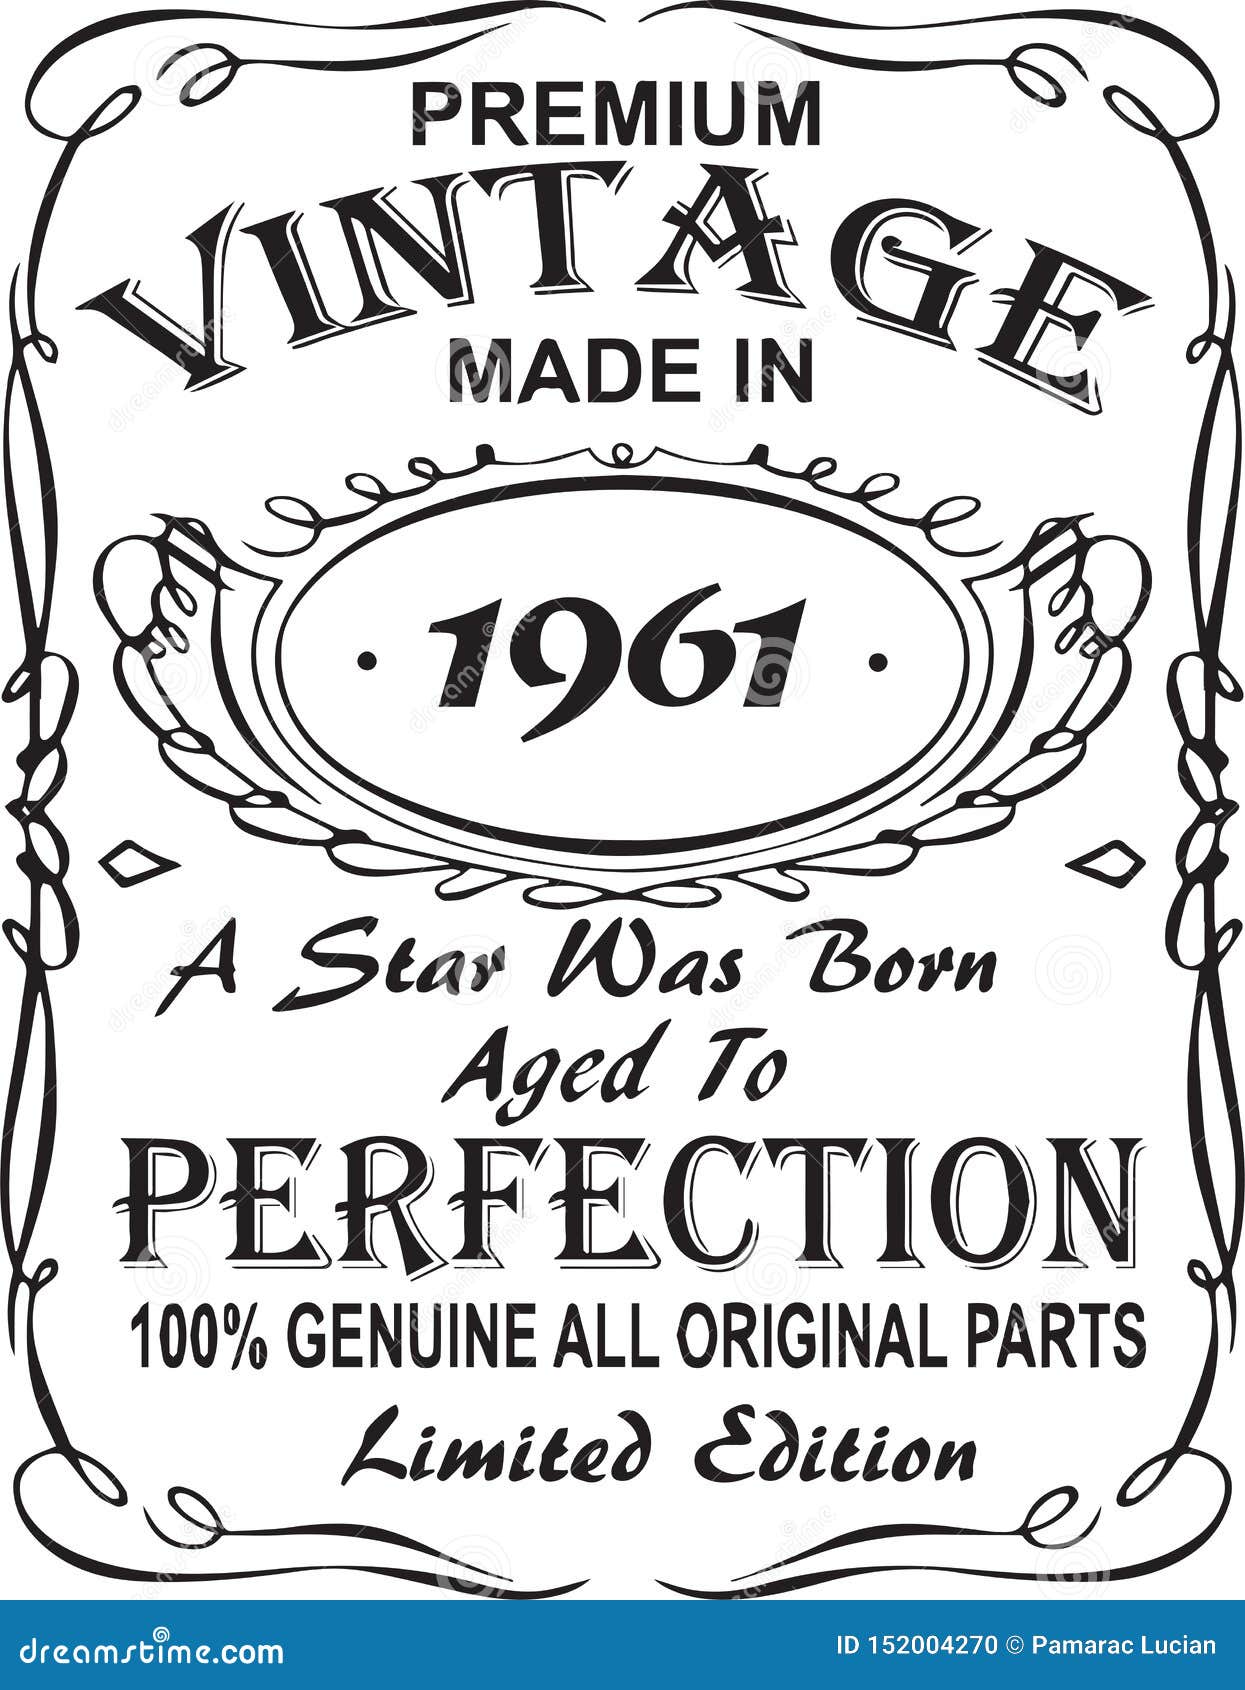 ial t-shirt print .premium vintage made in 1961 a star was born aged to perfection 100% genuine all original parts lim